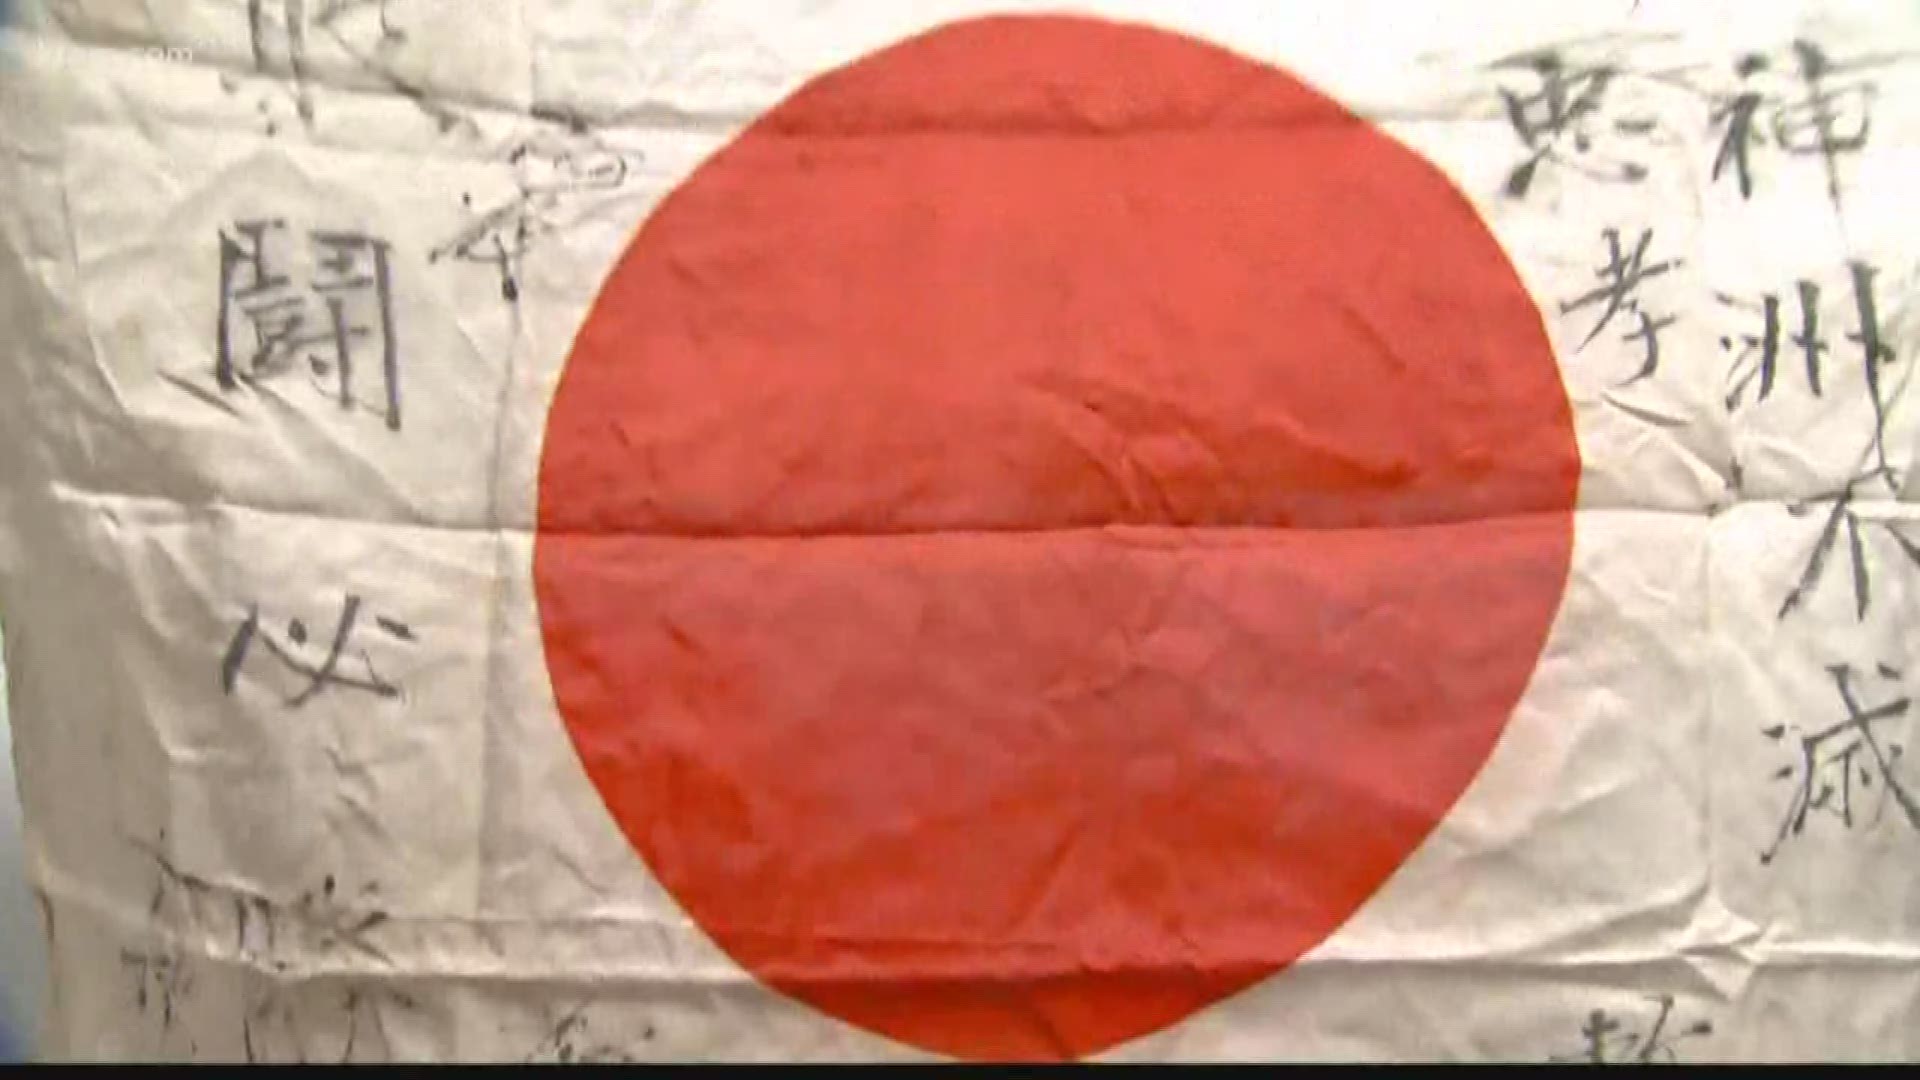 The five old flags are adorned with Japanese handwriting, likely messages from family members to their sons who left for combat.